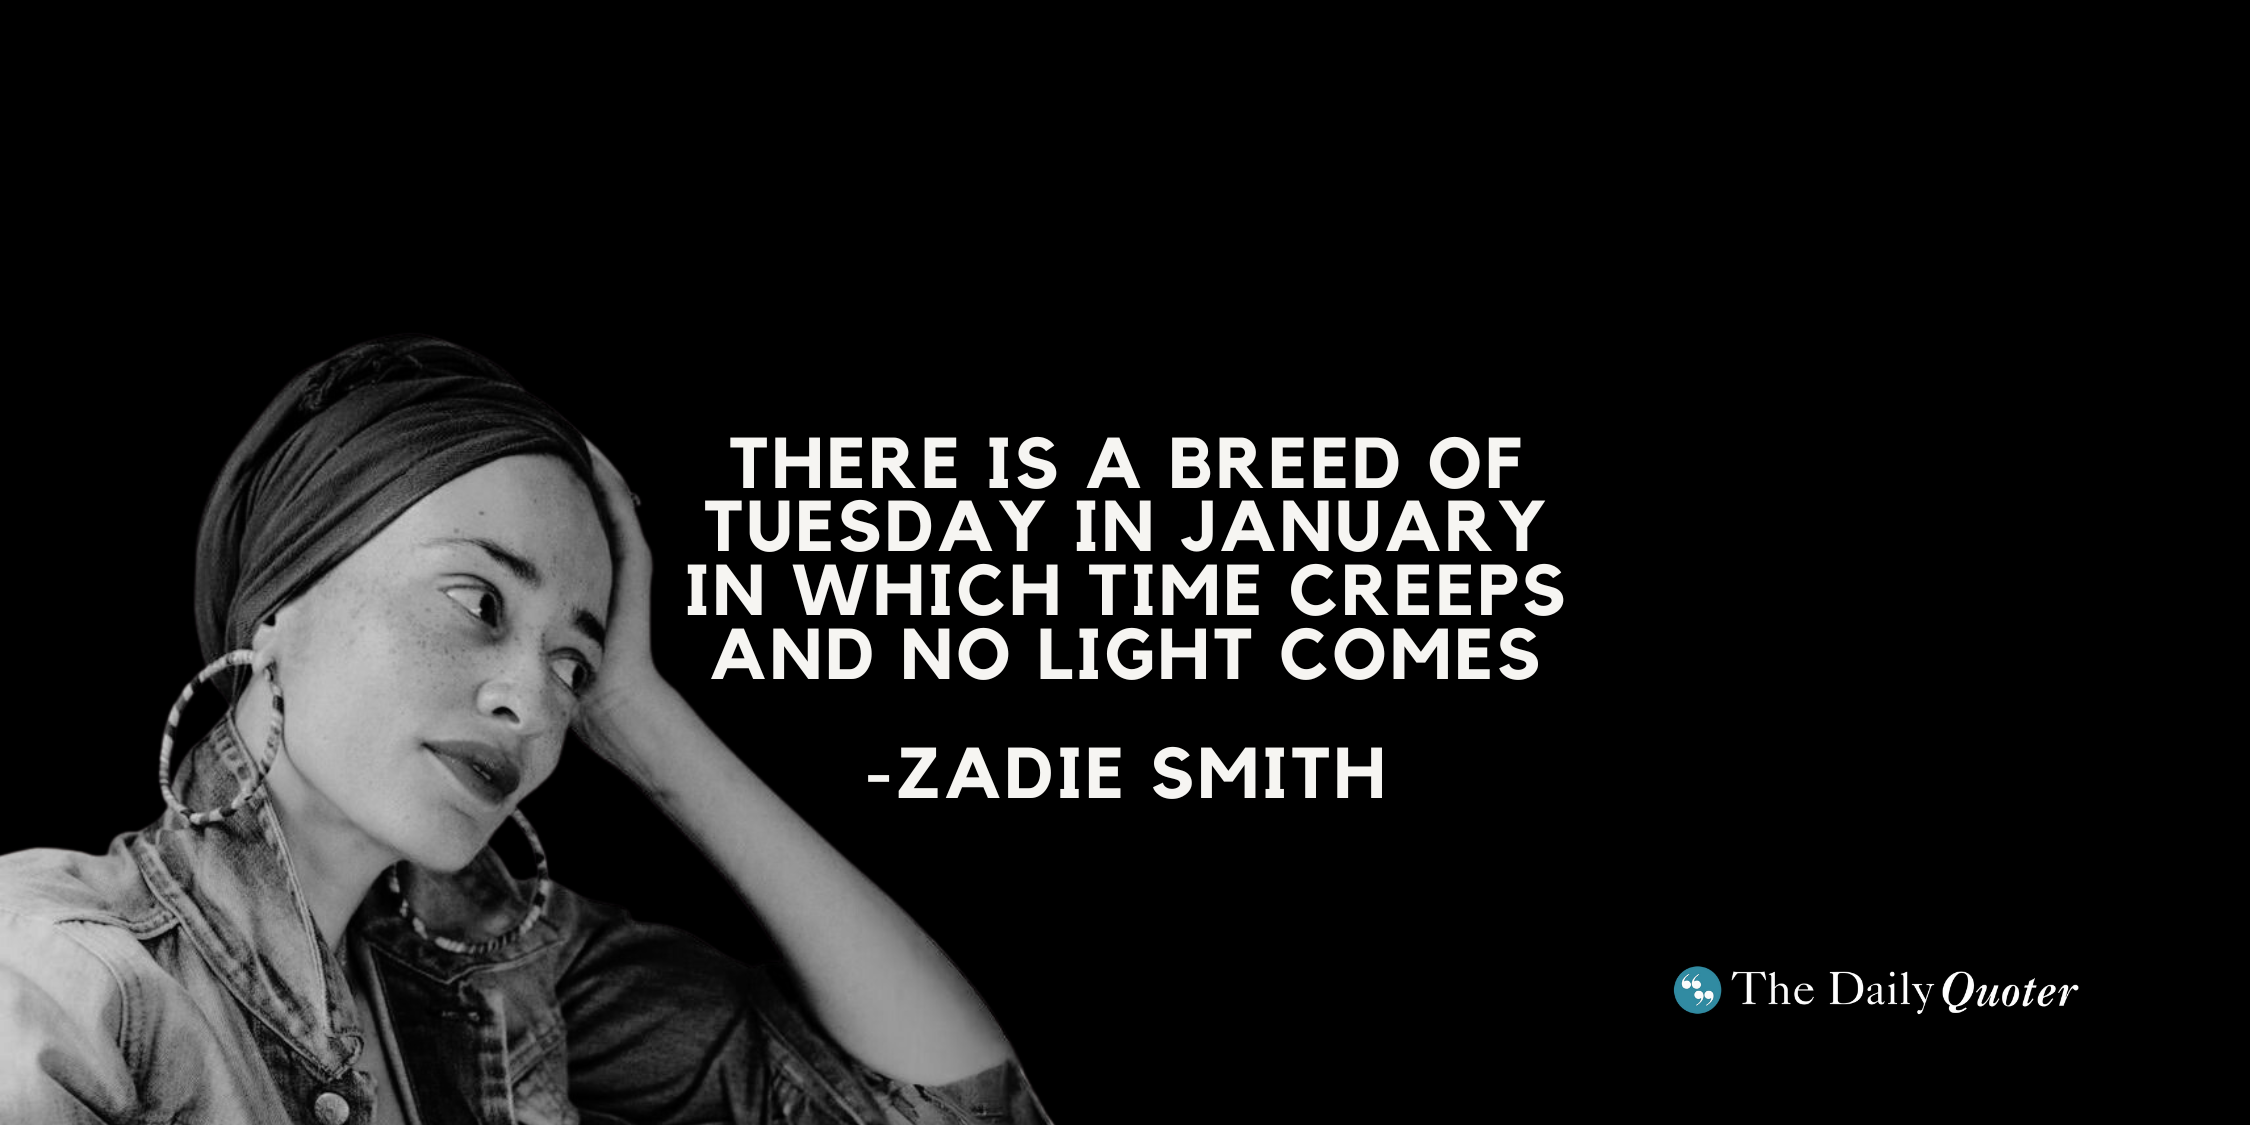 “There is a breed of Tuesday in January in which time creeps and no light comes” ― Zadie Smith